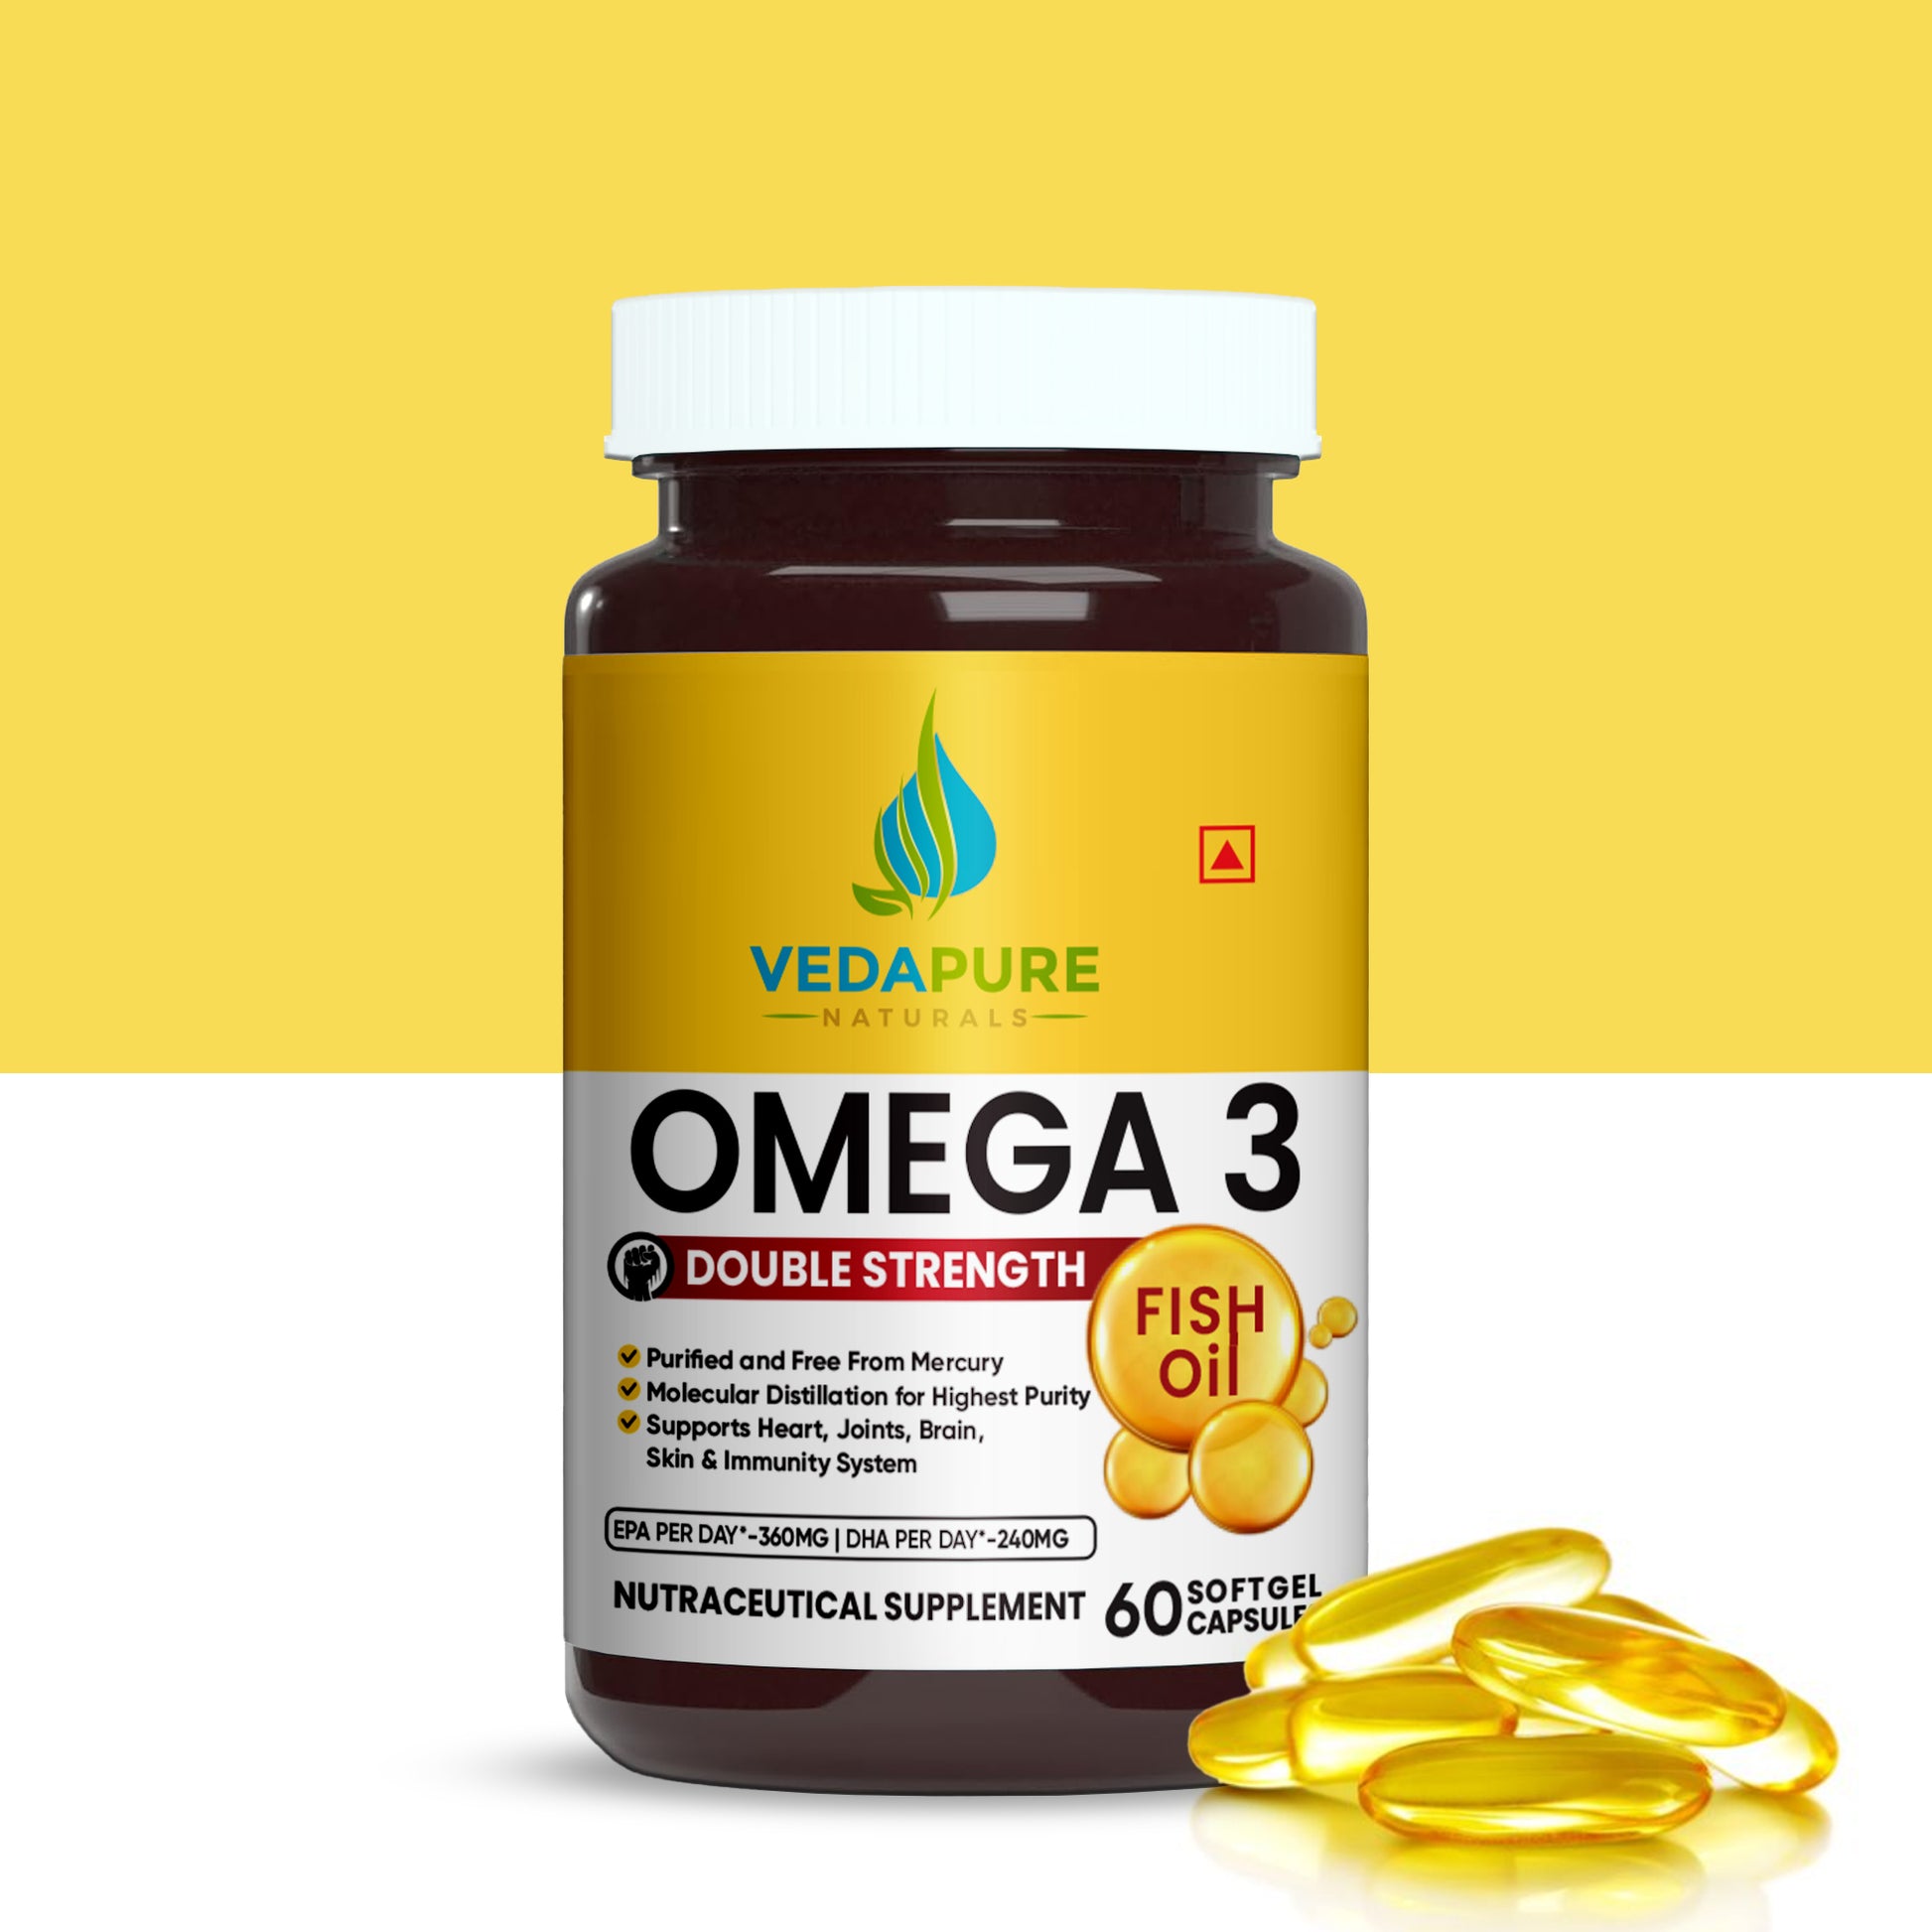 Double Strength Omega 3 Fish Oil 1000mg- 60 Softgel Vedapure Naturals